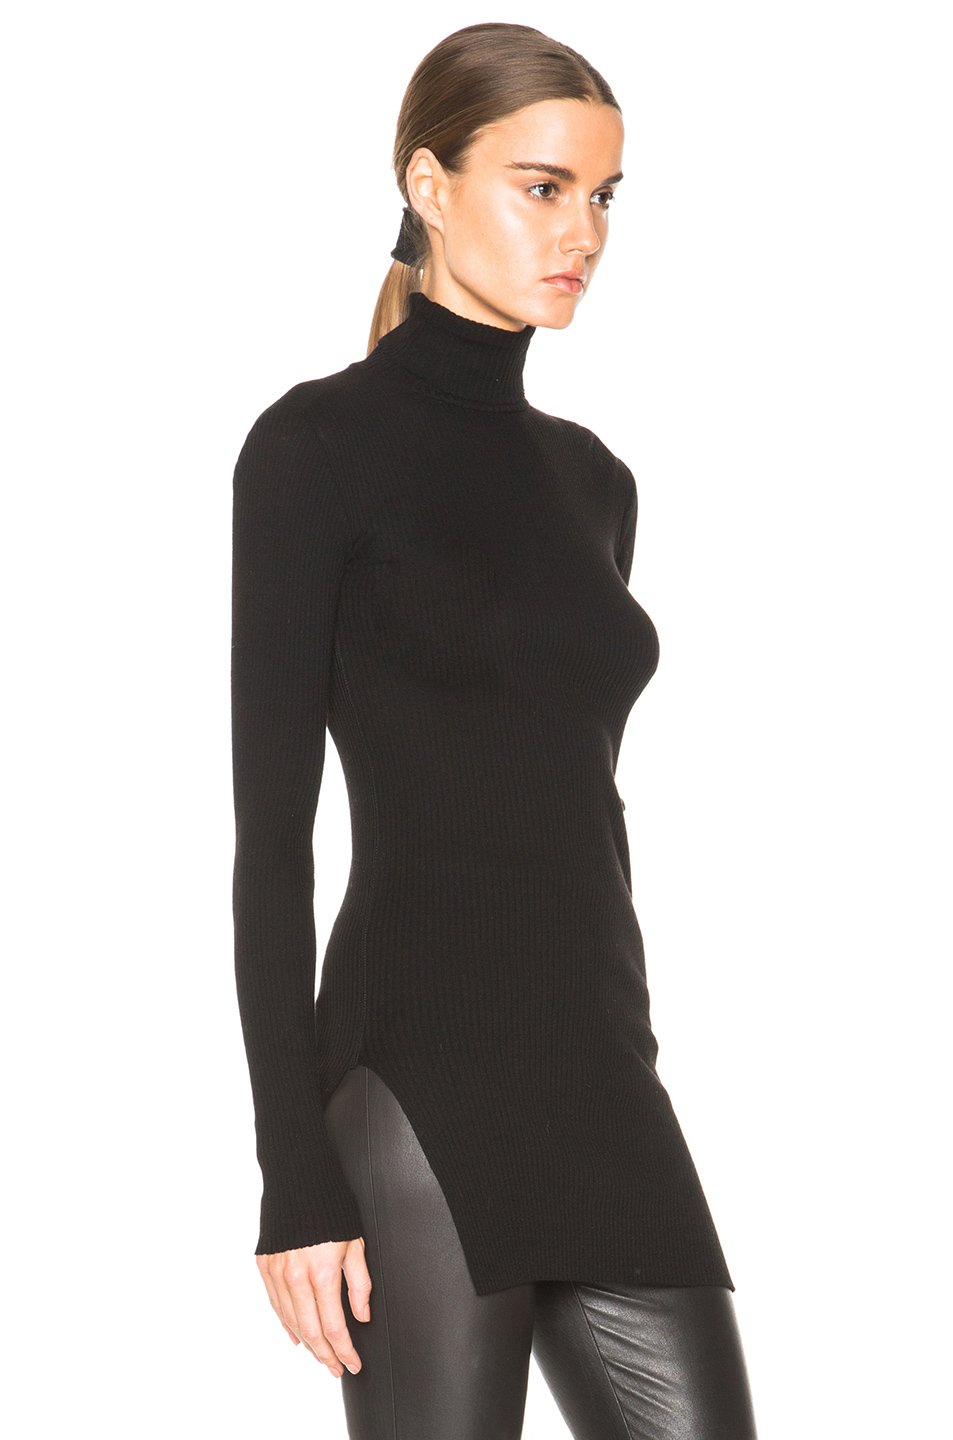 Helmut lang Fitted Turtleneck Sweater in Black | Lyst